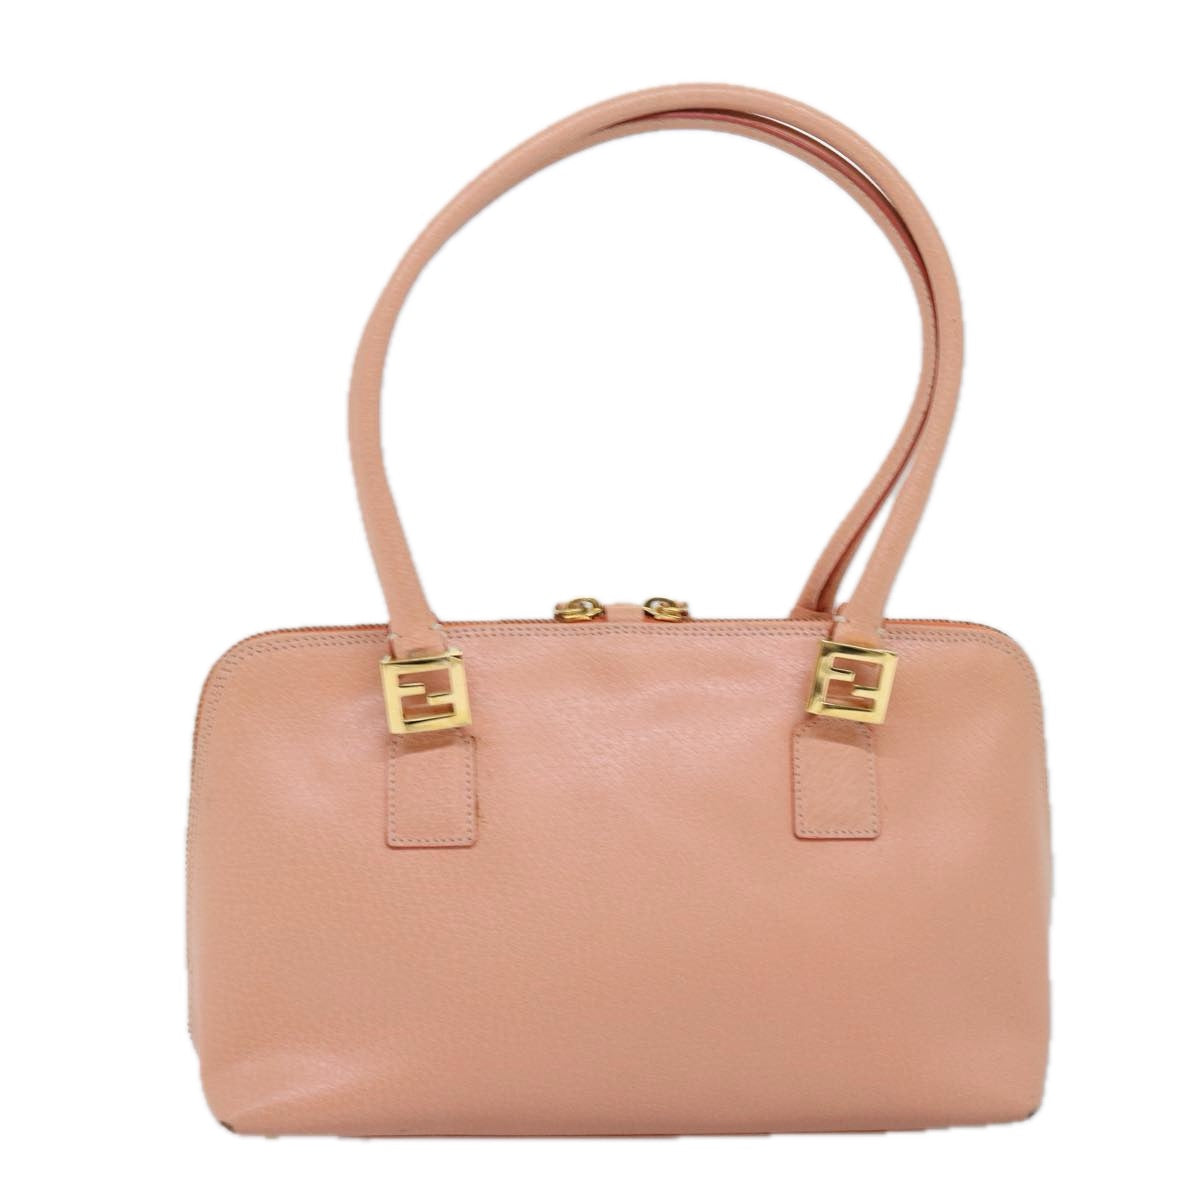 FENDI Hand Bag Leather Pink Auth 73857